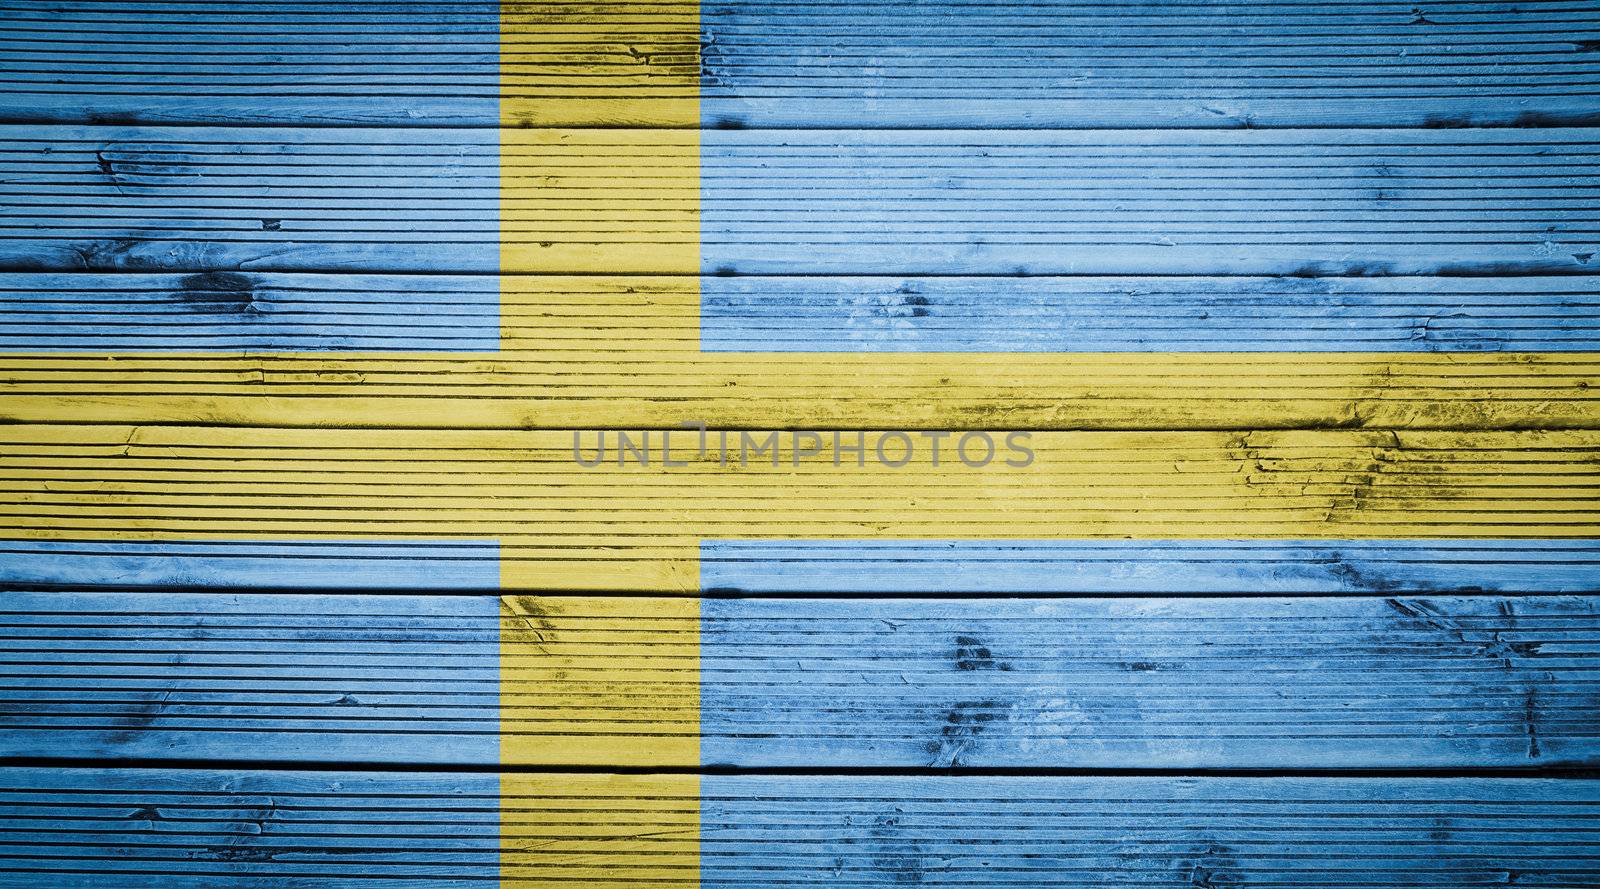 Natural wood planks texture background with the colors of the flag of Sweden